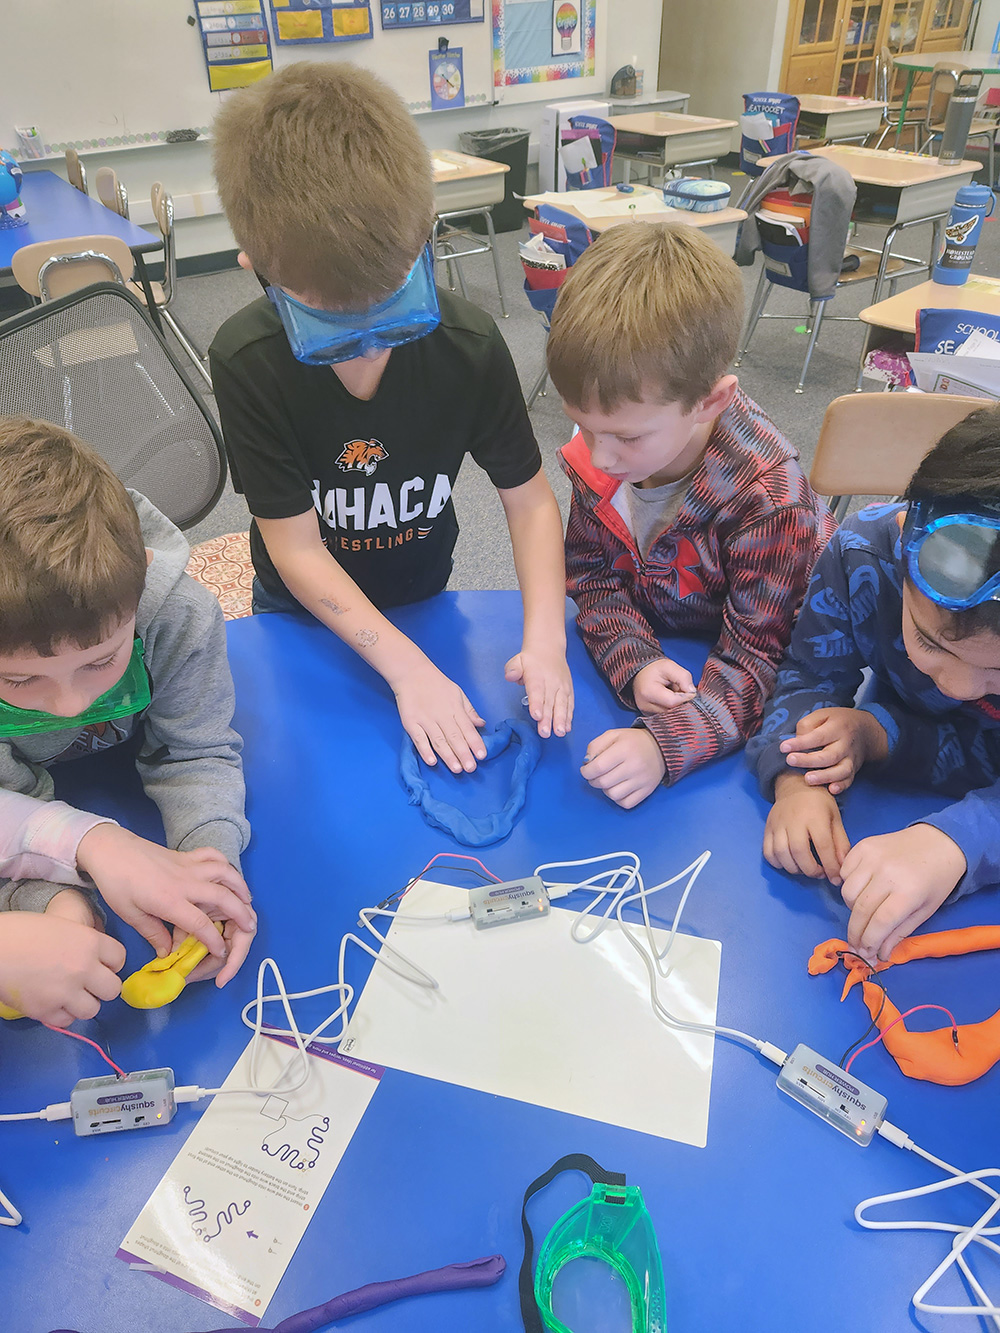 Four children are gathered around a blue table engaged in a science activity as part of an after school program. Two children are wearing safety goggles, one is touching blue clay while the others observe. Wires and small electronic devices are scattered on the table.